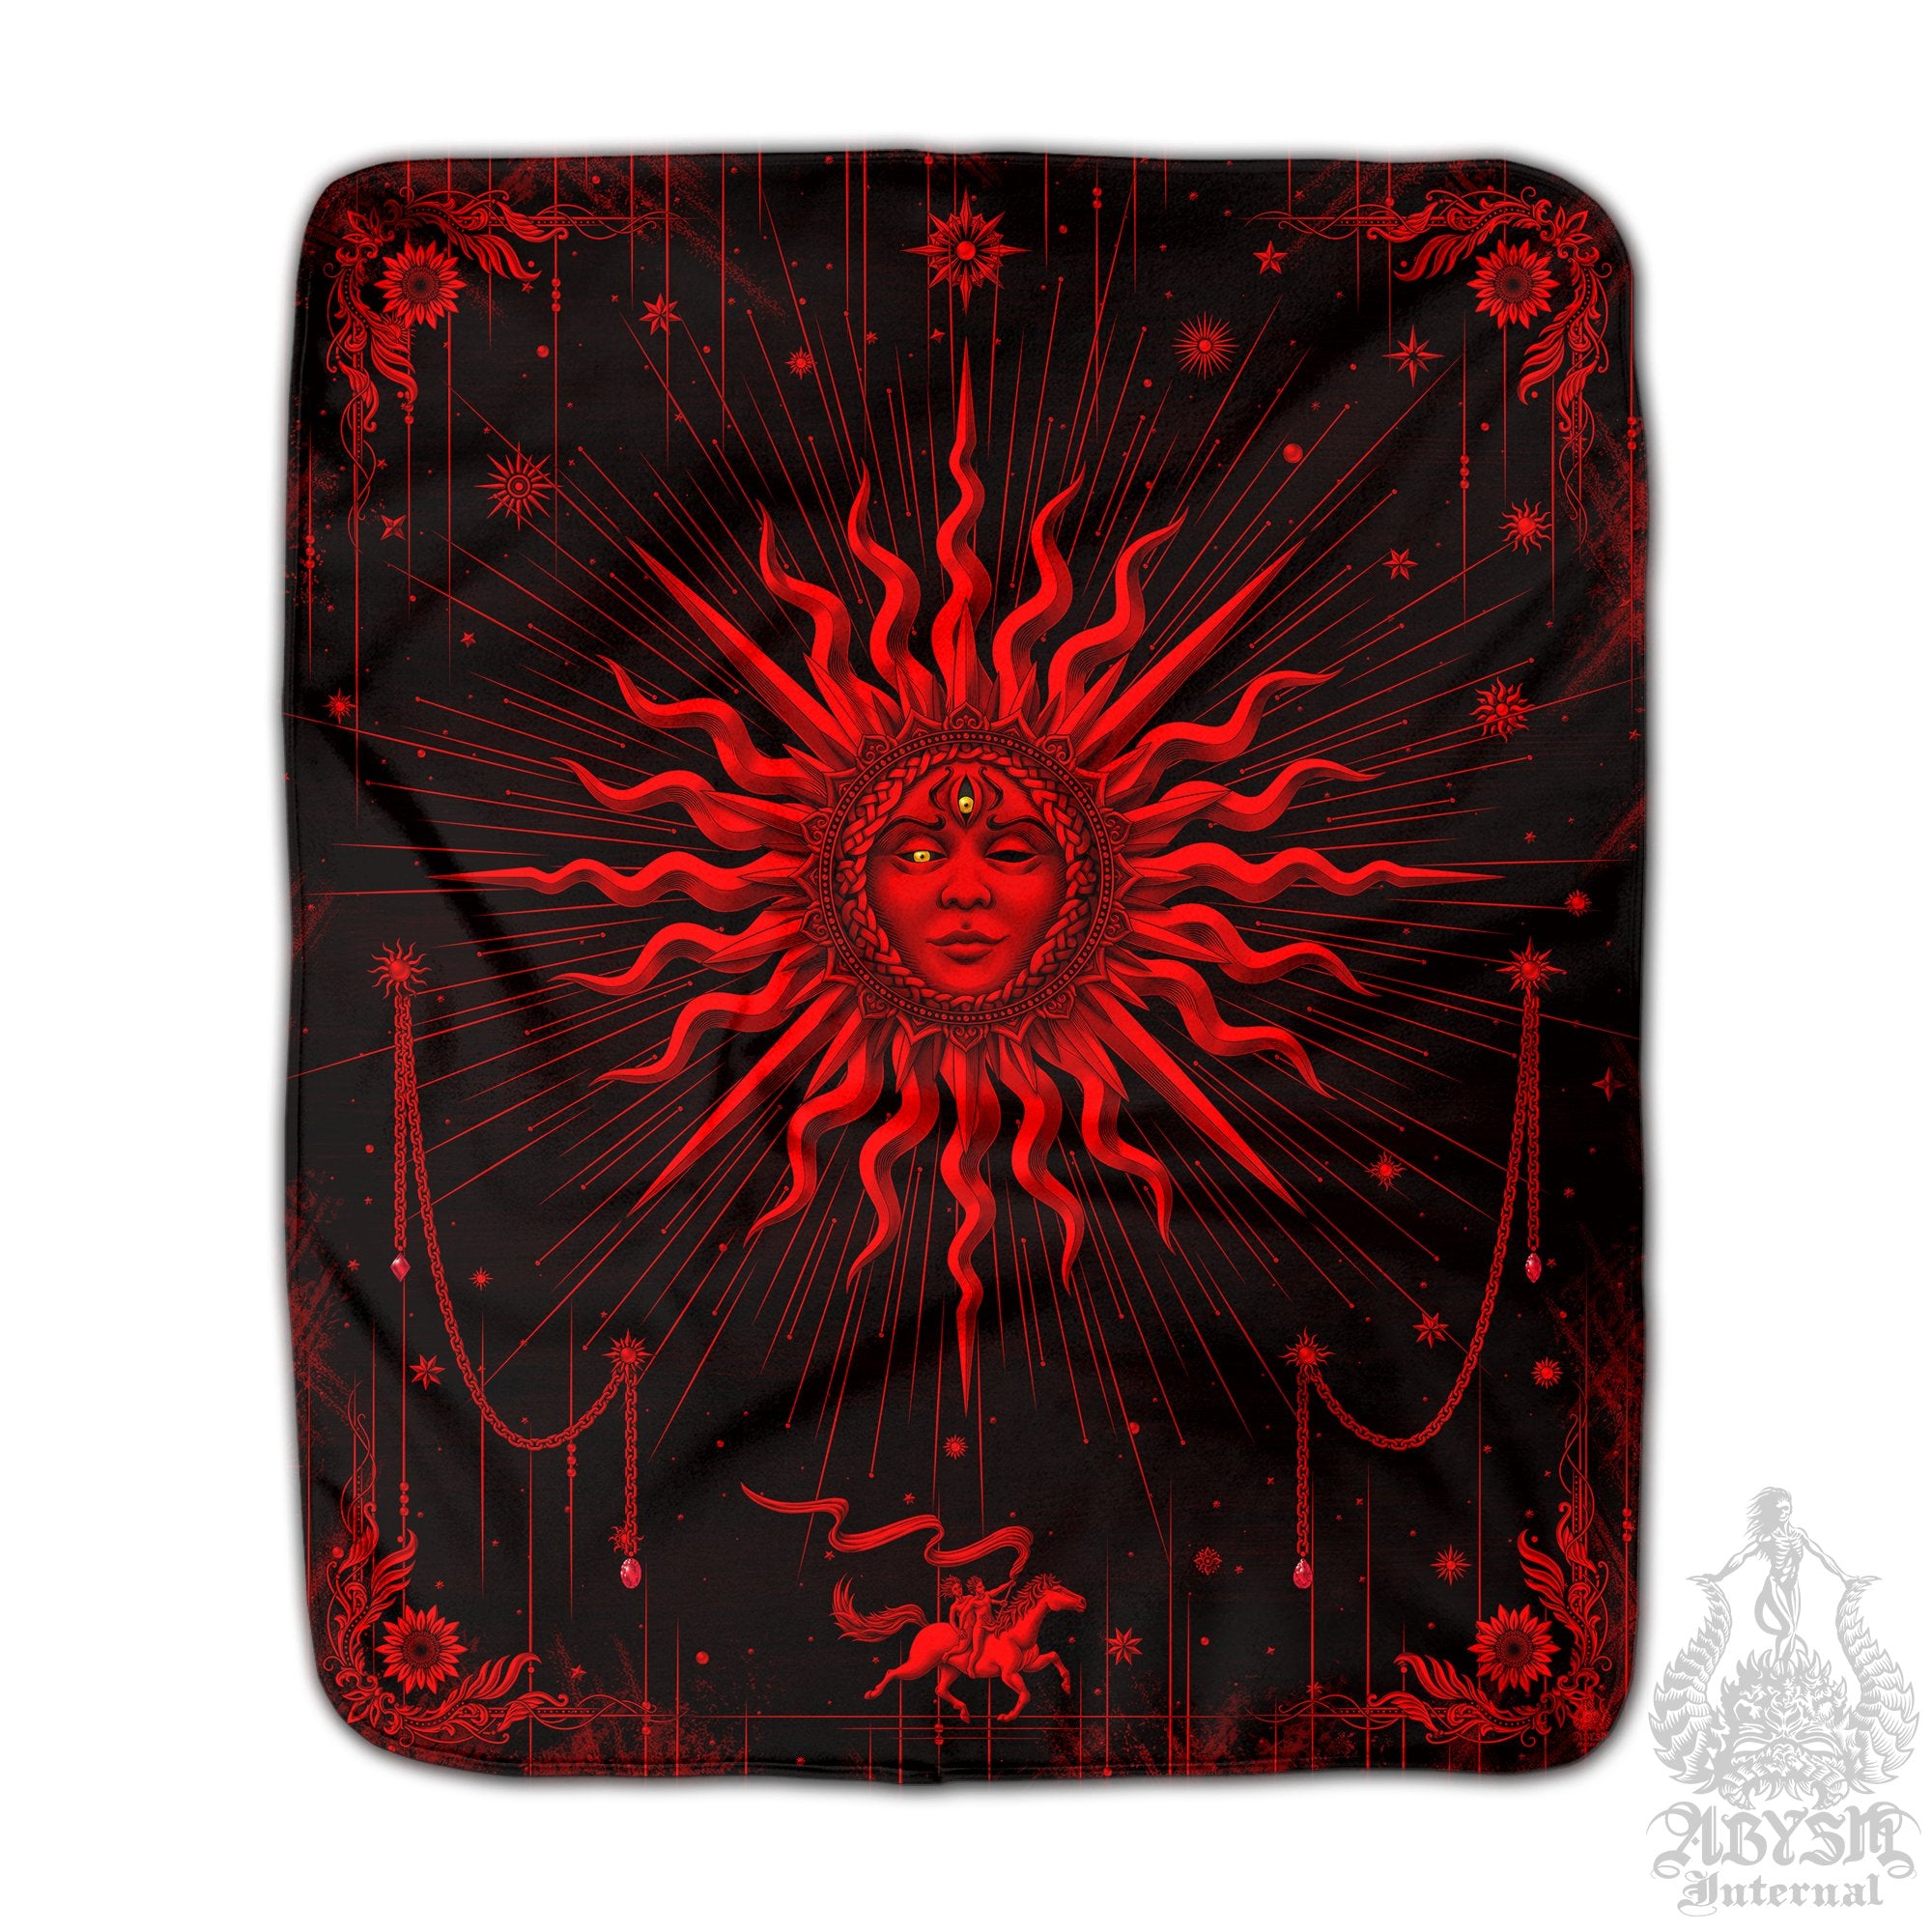 Gothic Sun Sherpa Fleece Throw Blanket, Witch's Magic Esoteric Room, Goth Tarot Arcana Art, Black and Red Home Decor, Fortune Gift - Abysm Internal